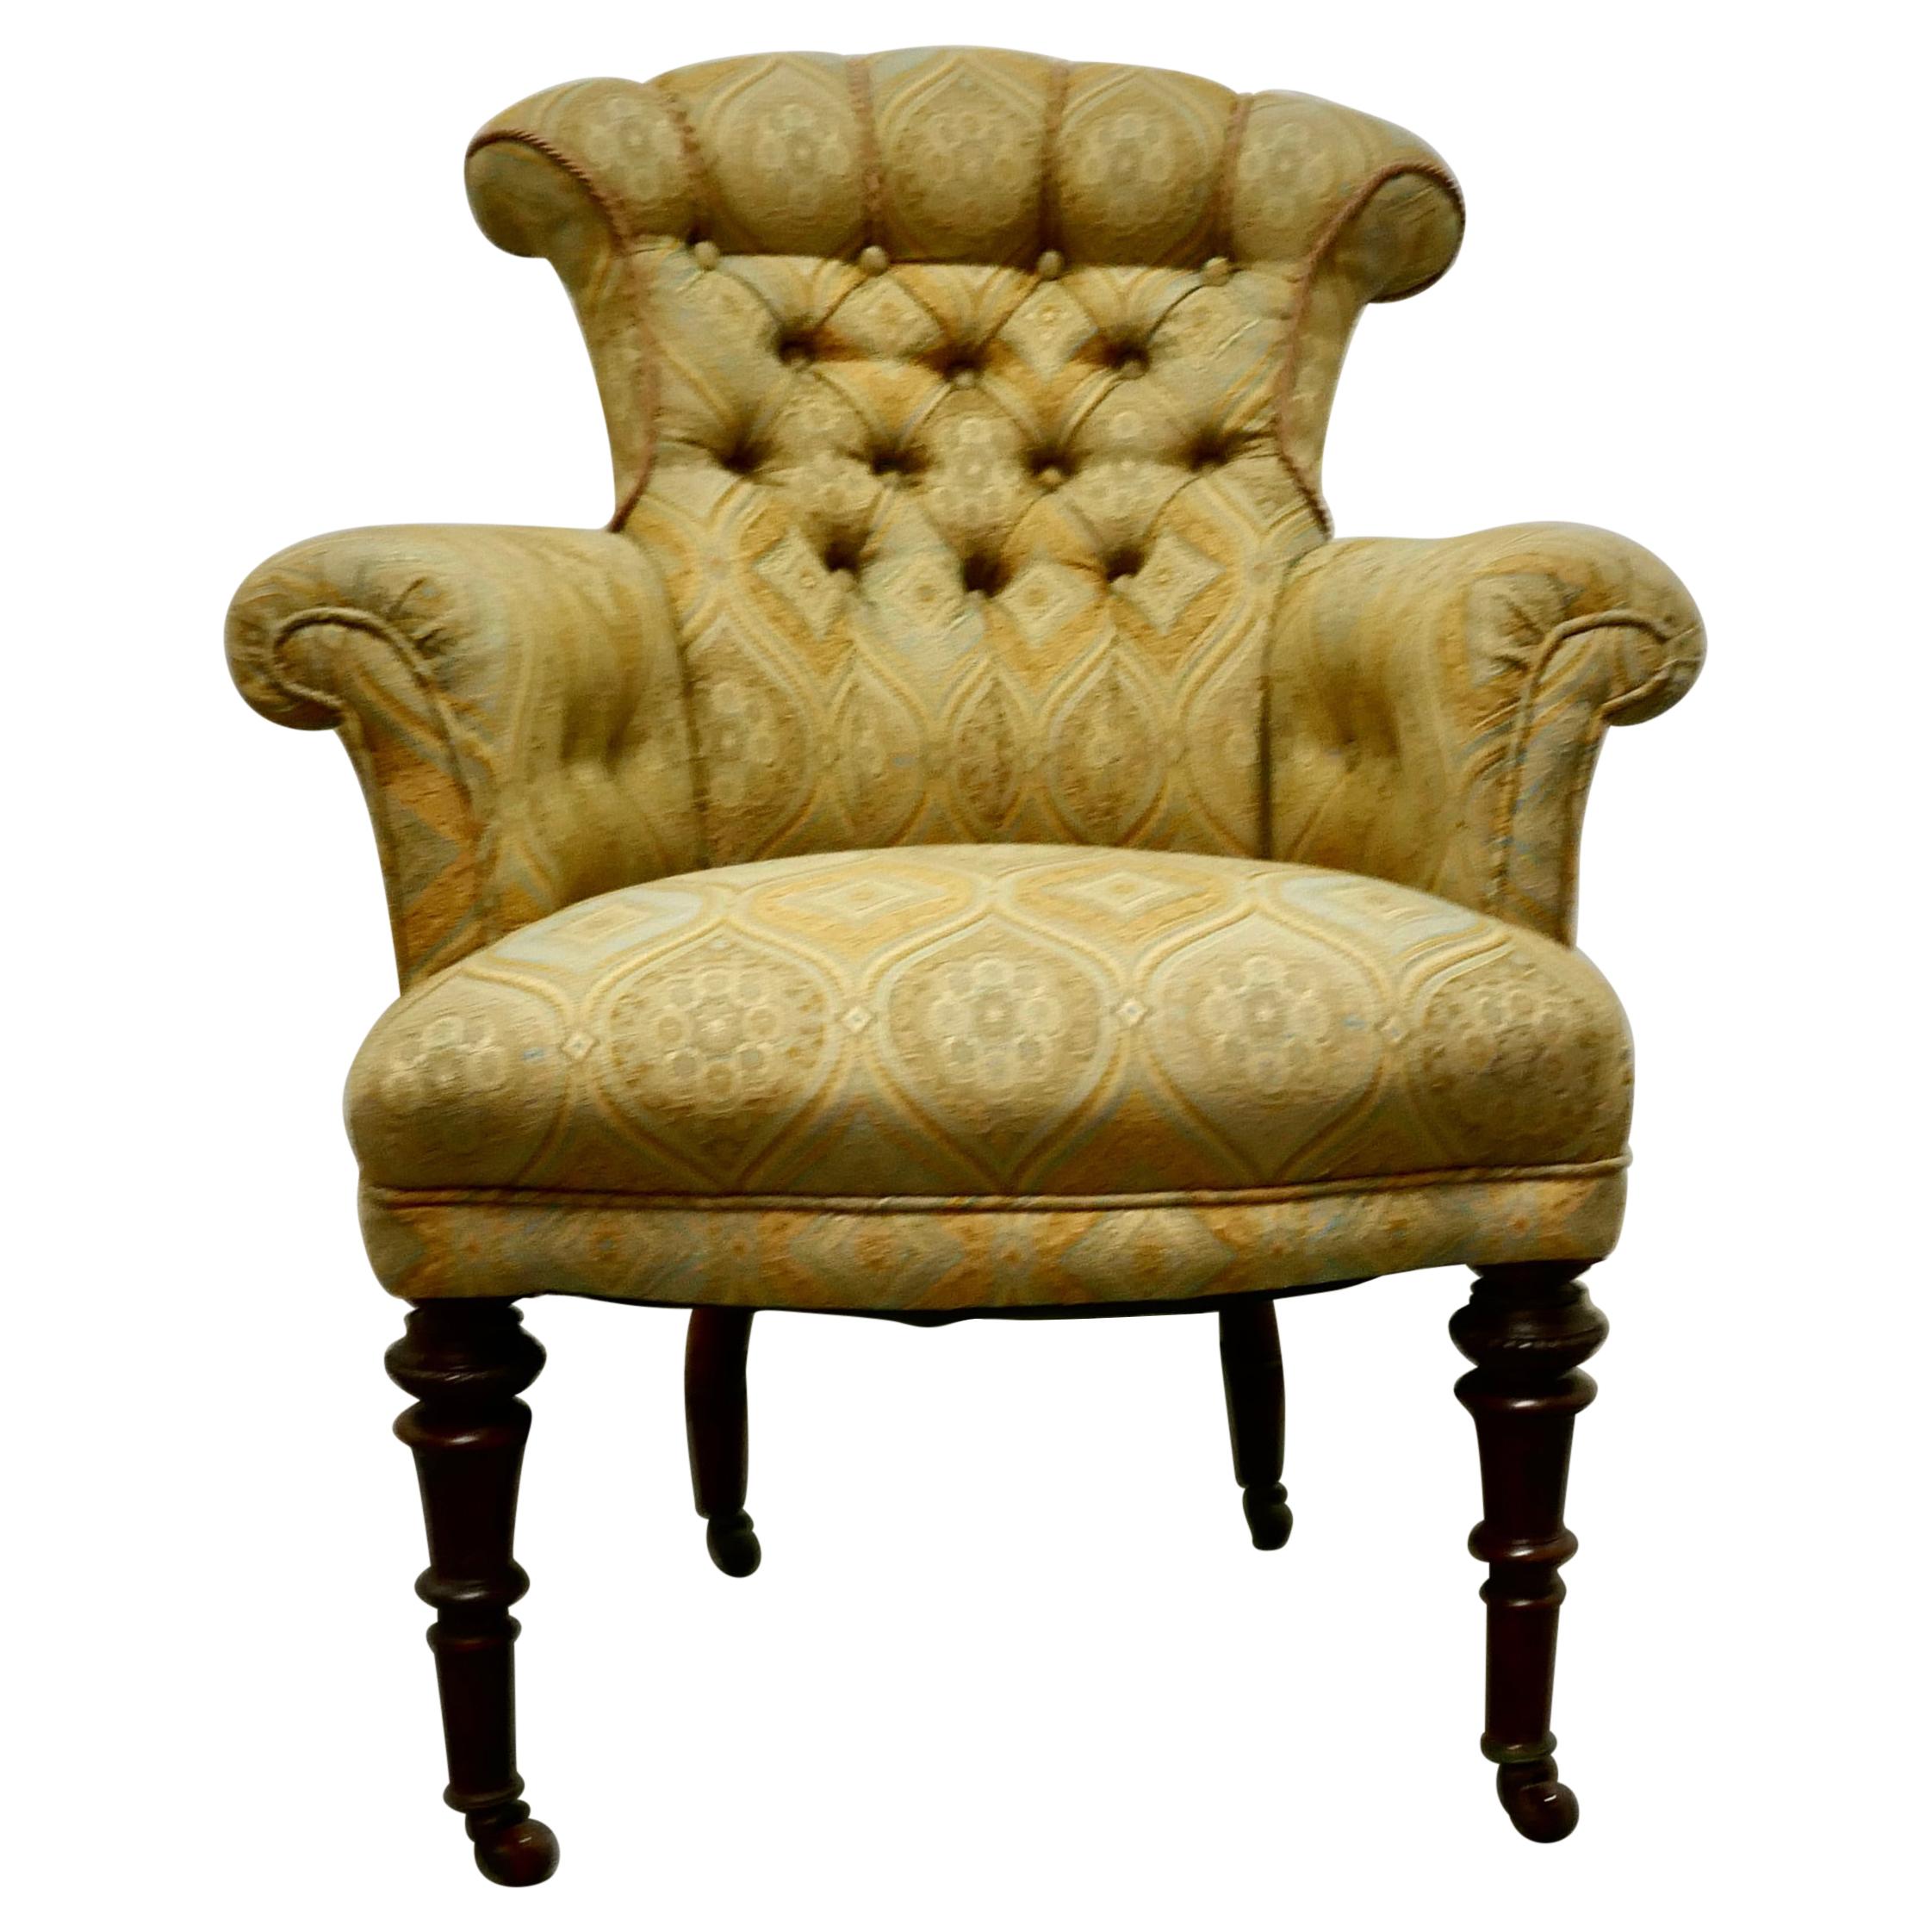 Fine Quality Victorian Button Back Arm Chair